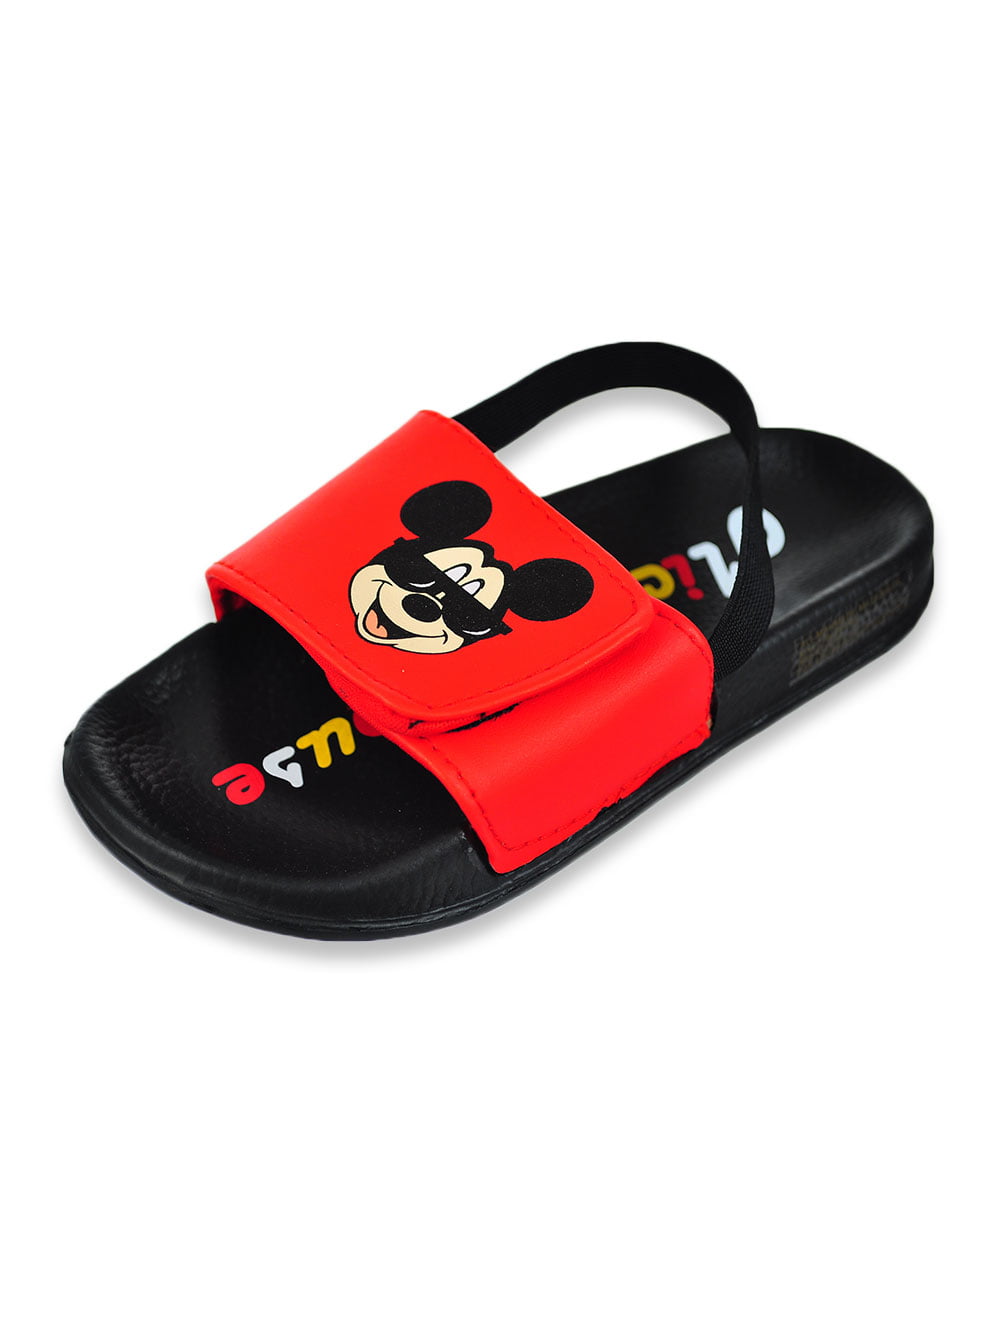 Mickey Mouse Rubber Slide Sandals Luisaviaroma Boys Shoes Sandals 